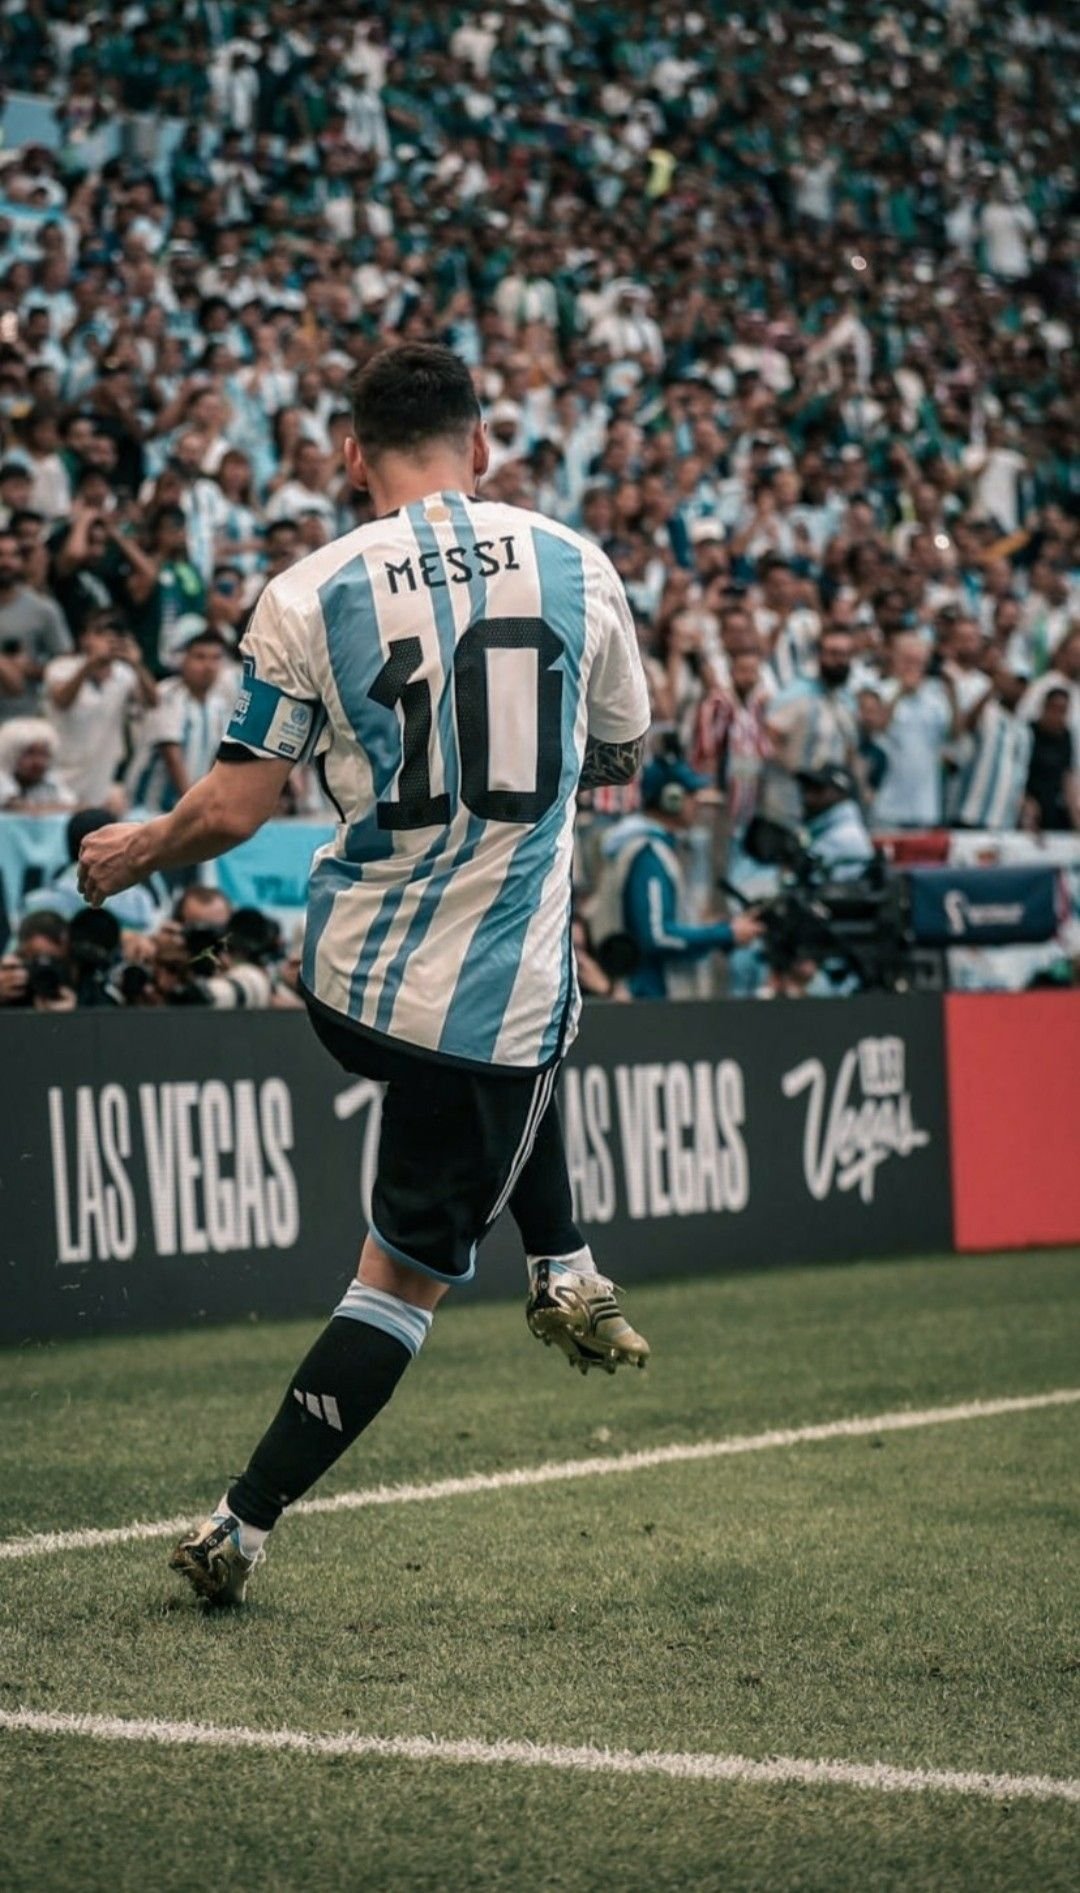 Messi Wallpaper With Style